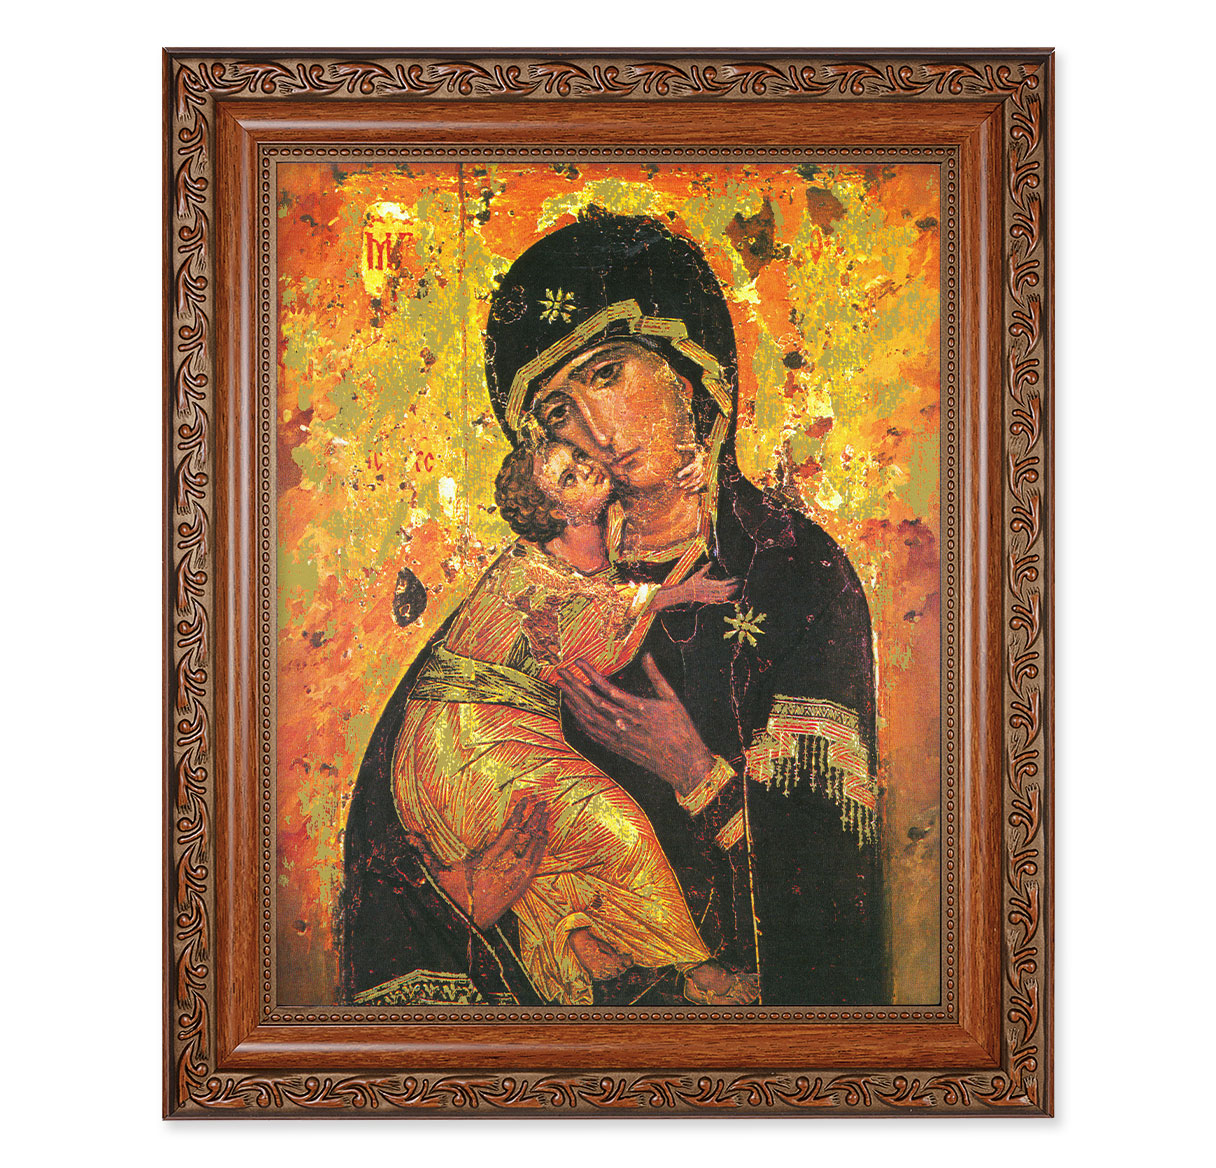 Our Lady of Vladimir Mahogany Finished Framed Art